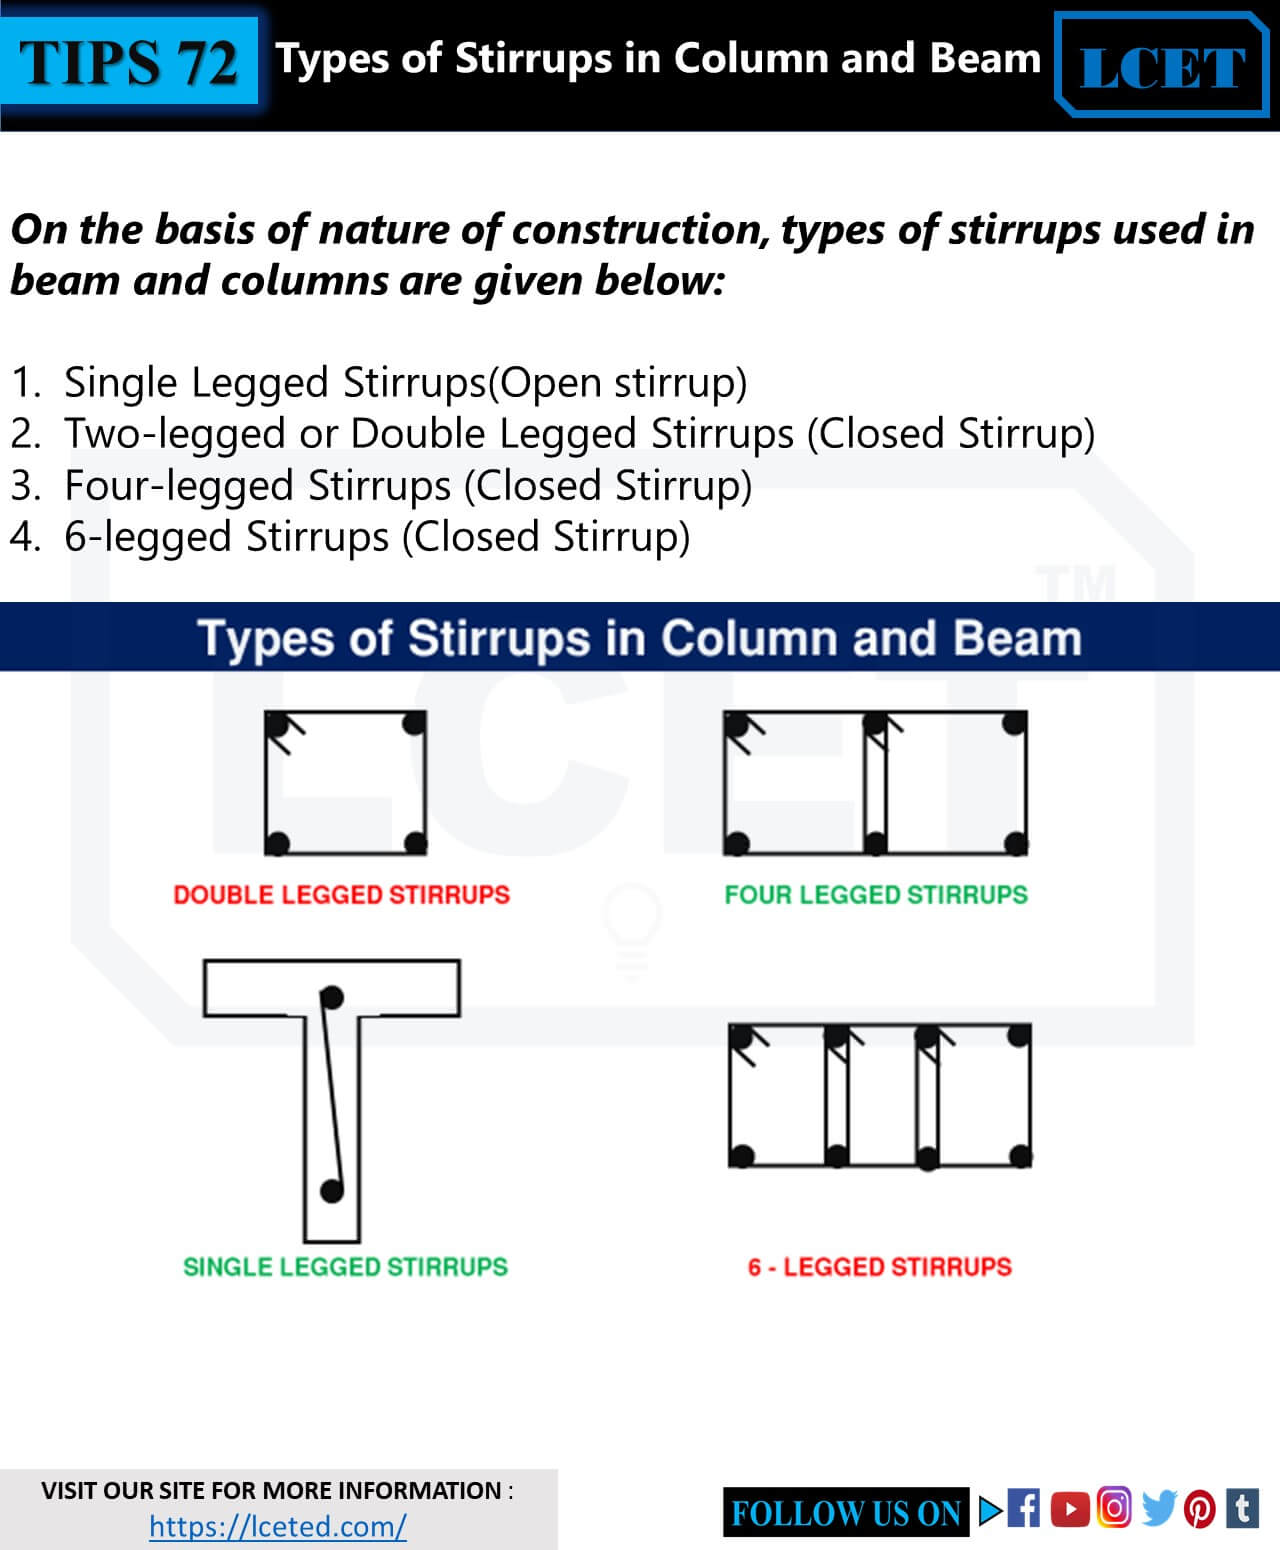 How to work out cutting length for column circular stirrups